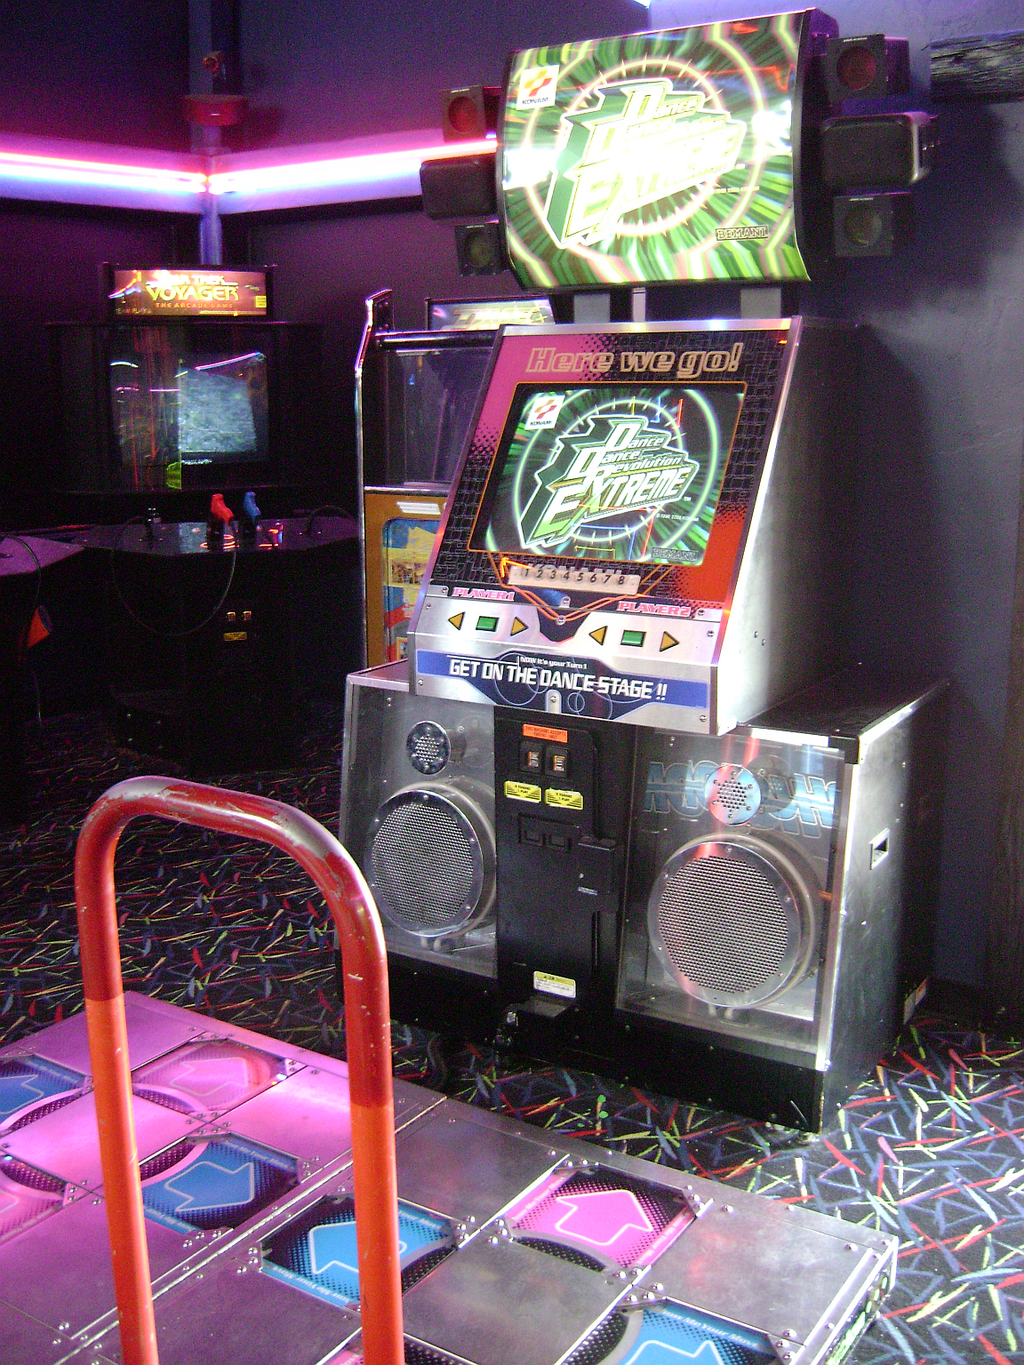 A Dance Dance Revolution game in an arcade with dark walls and a bright 80s-pattern carpet